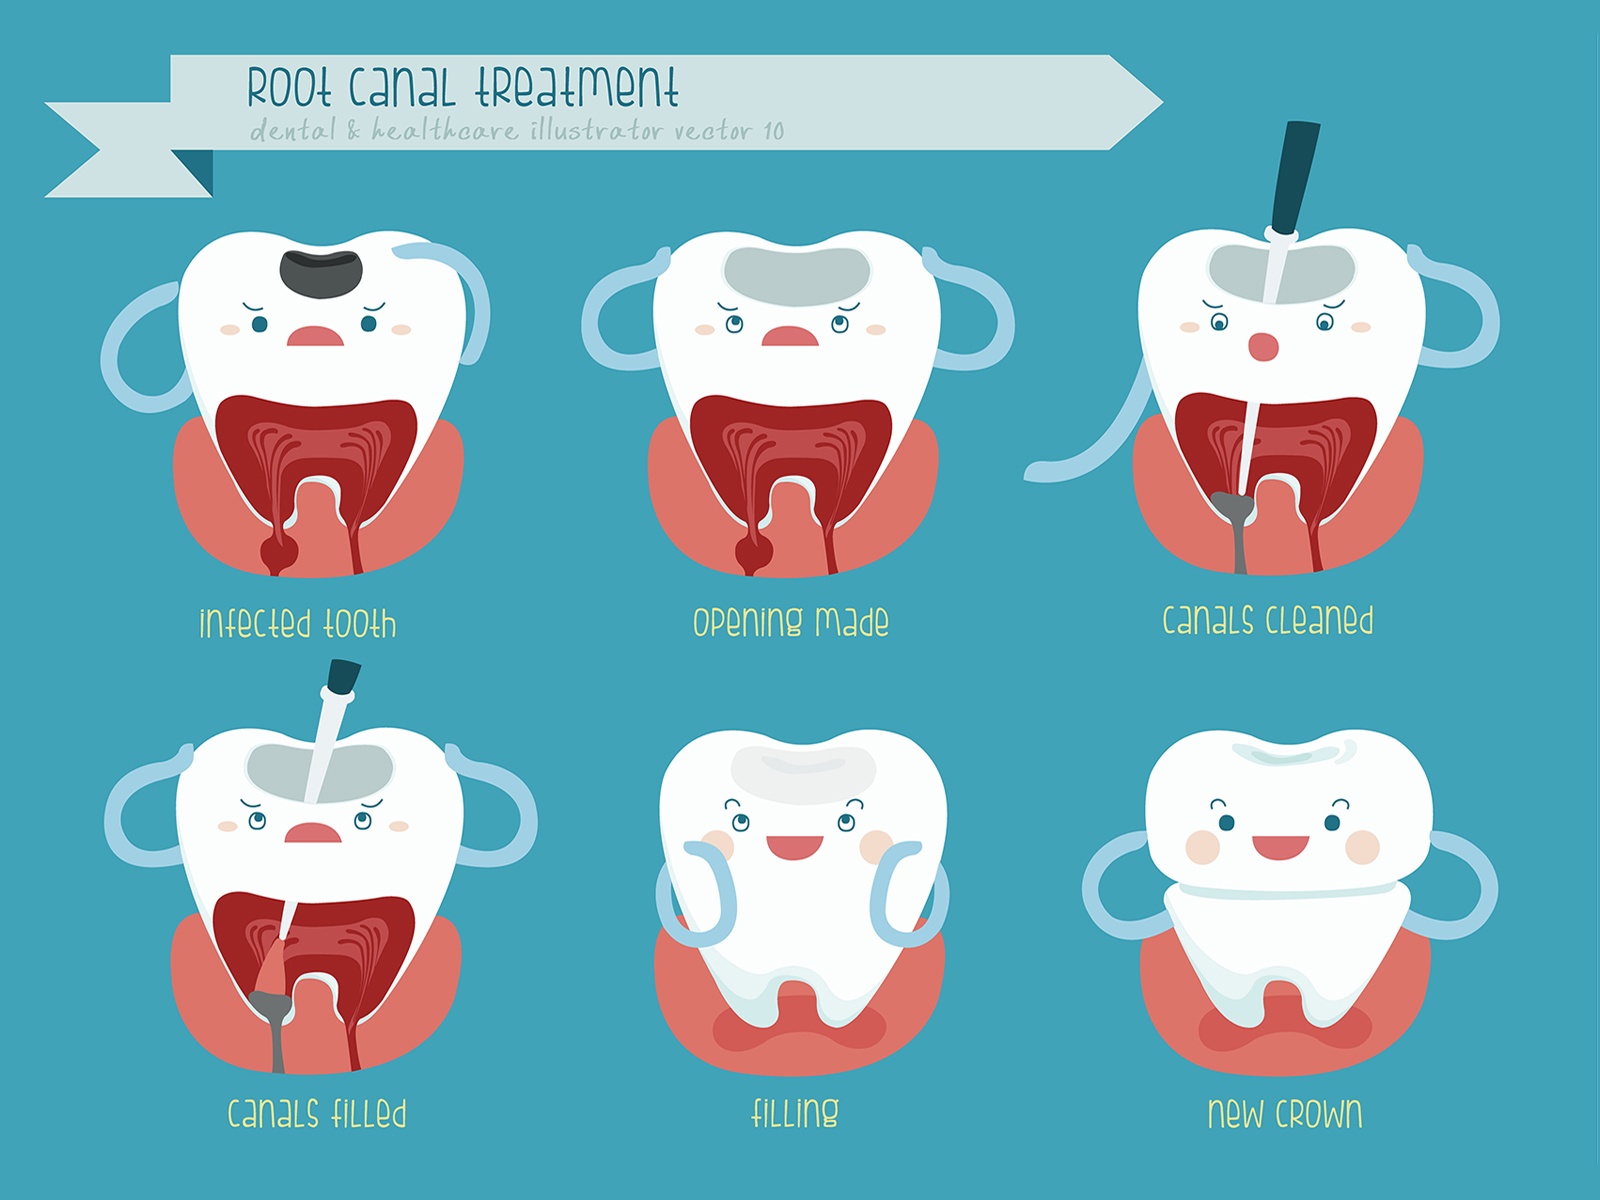 Can You Naturally Heal a Tooth That Needs a Root Canal?